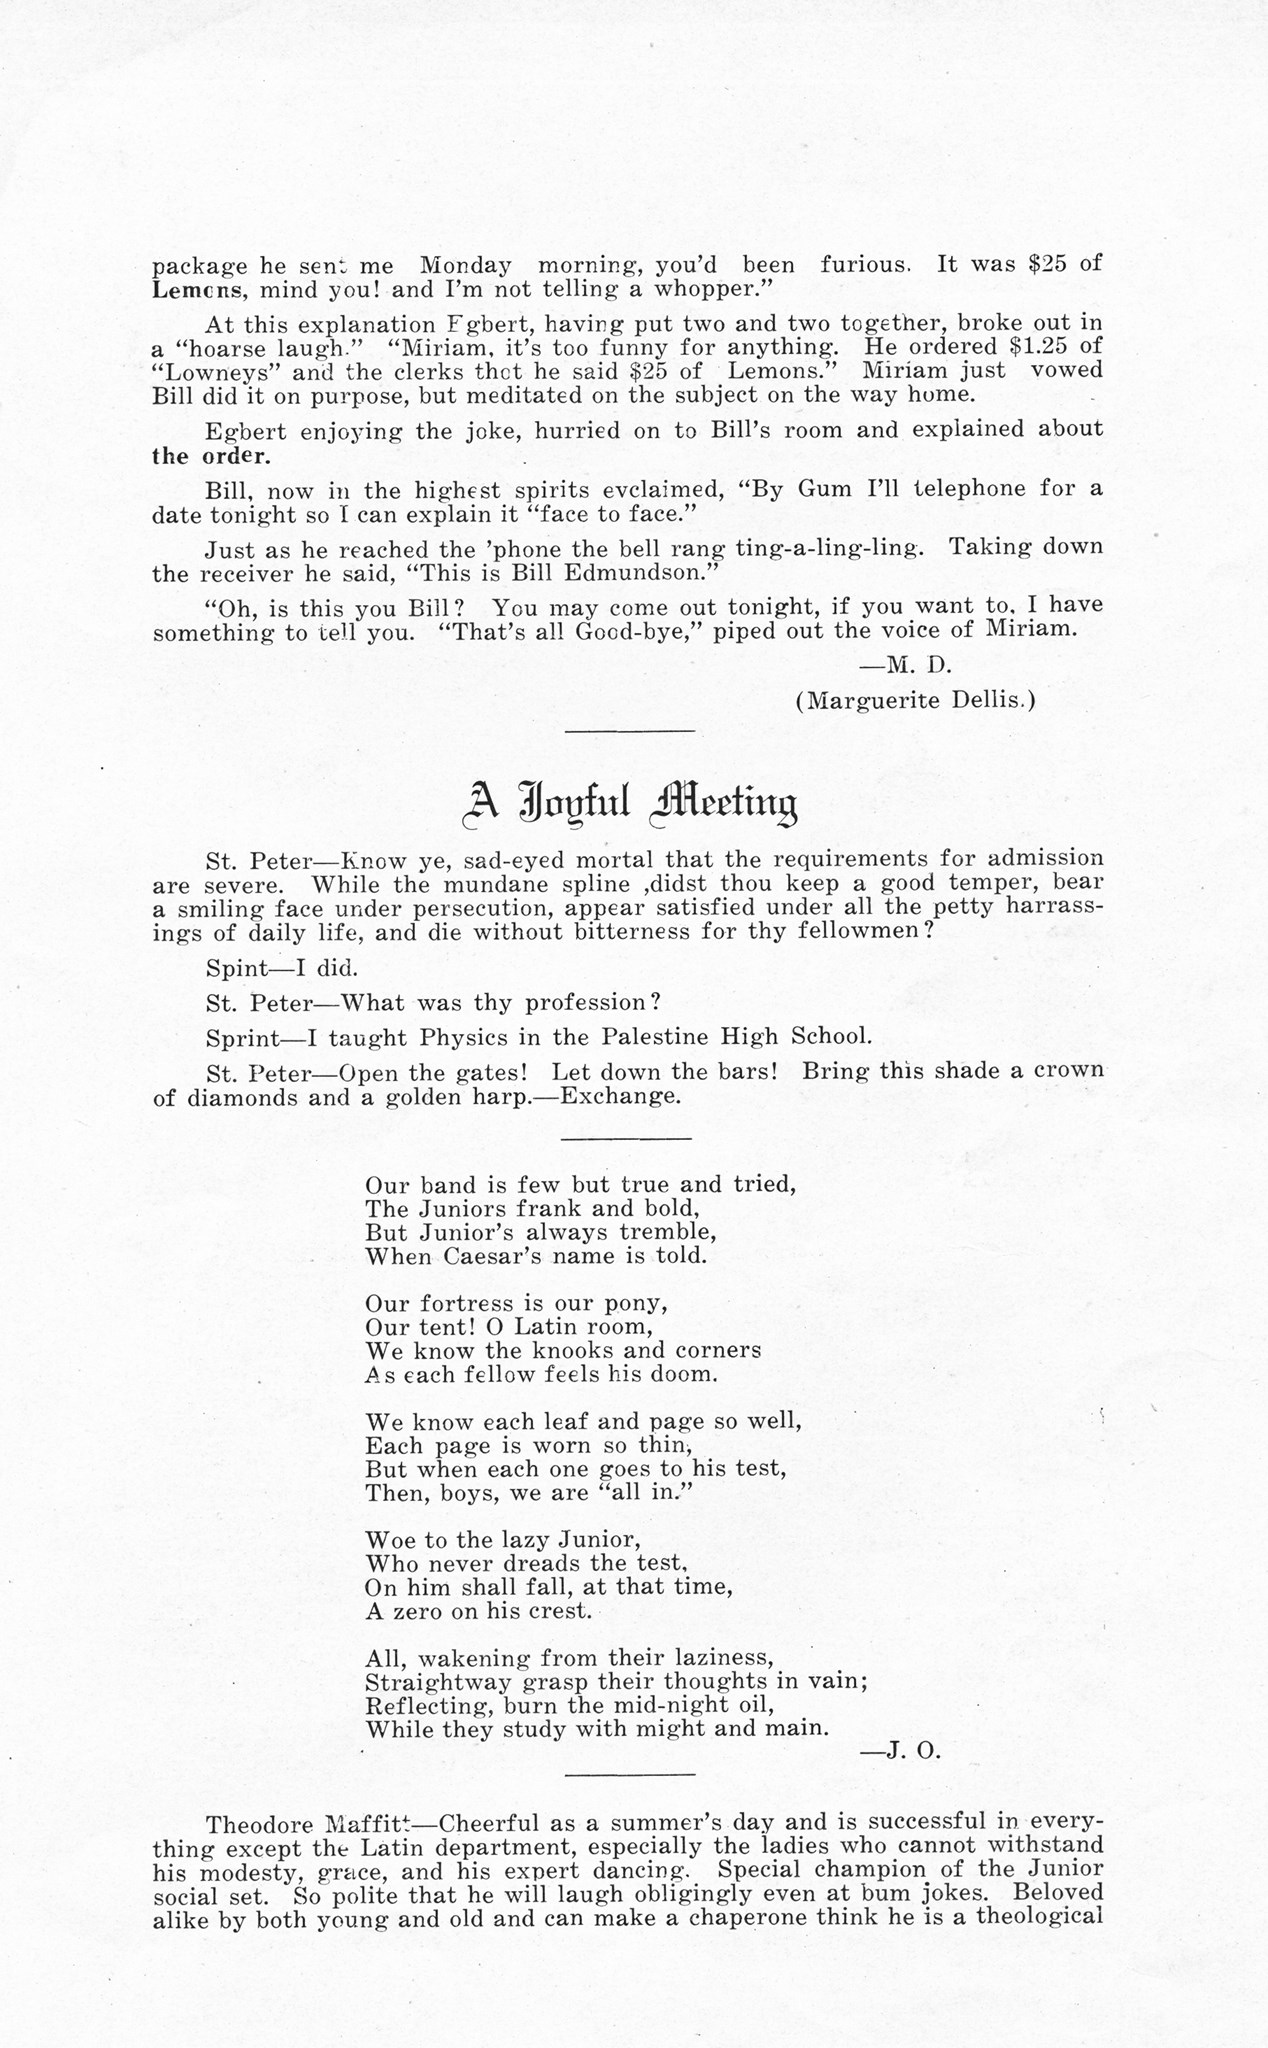 ../../../Images/Large/1912/Arclight-1912-pg0063.jpg